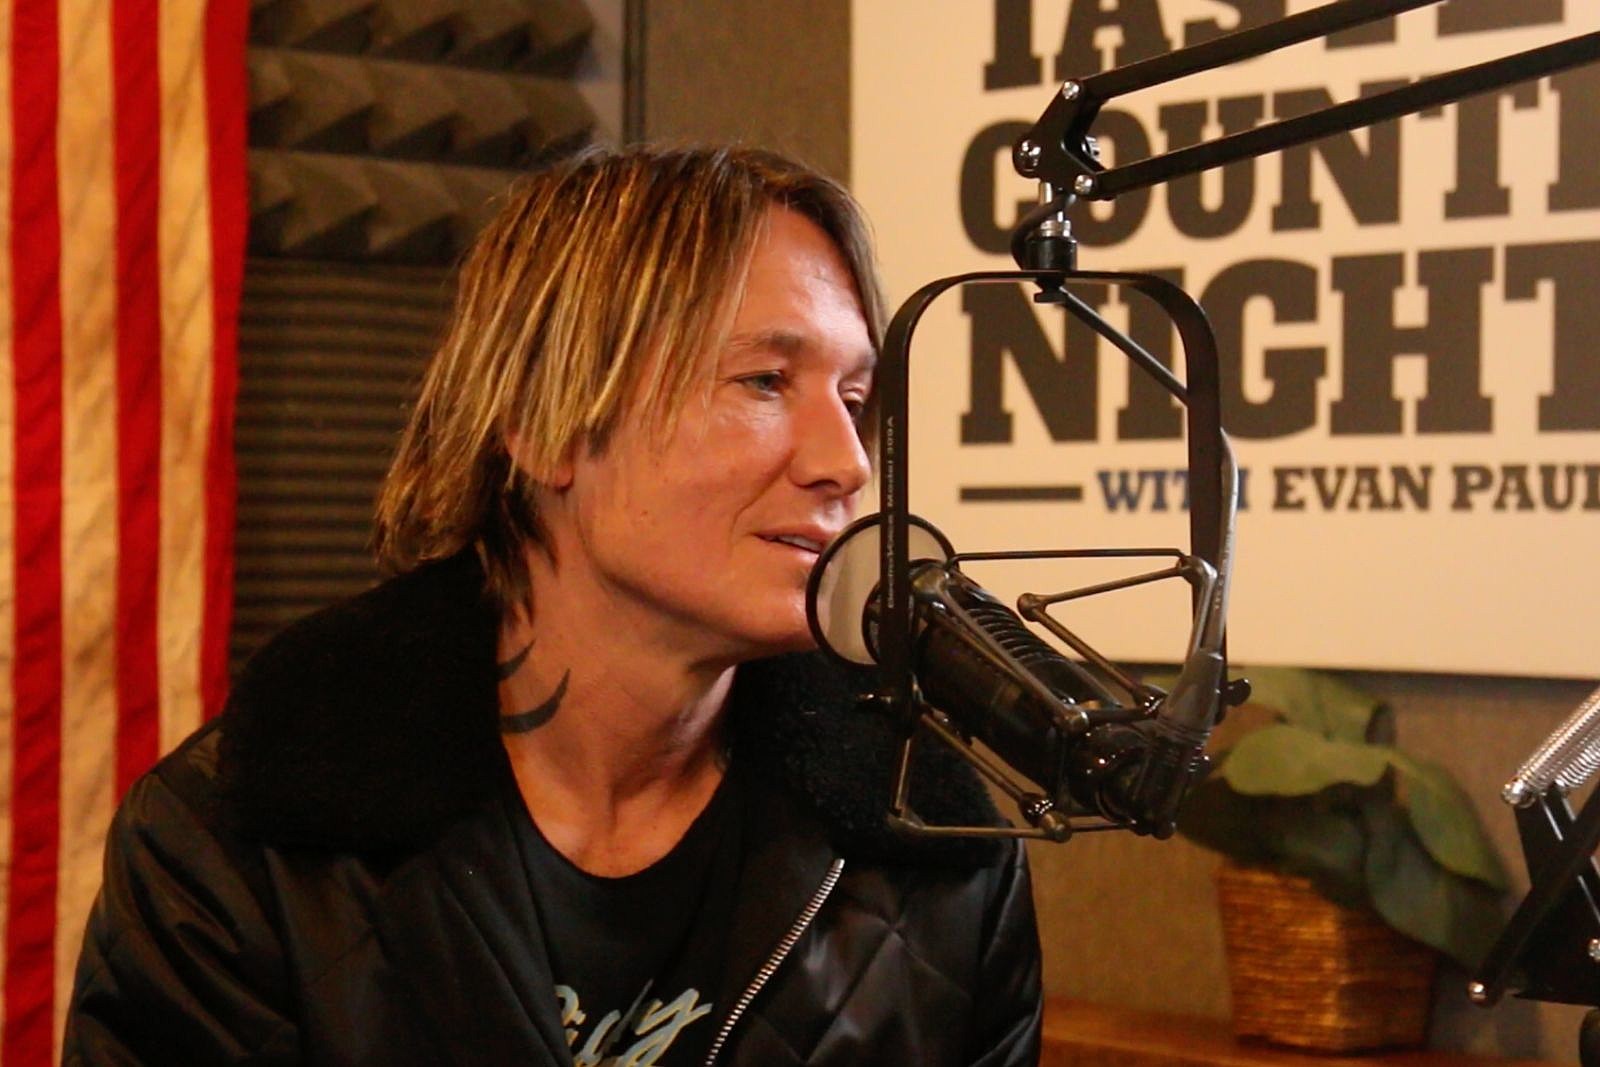 Keith Urban on Valentine’s Day: It’s the ‘Sentiment’ and the
‘Thought That Counts’